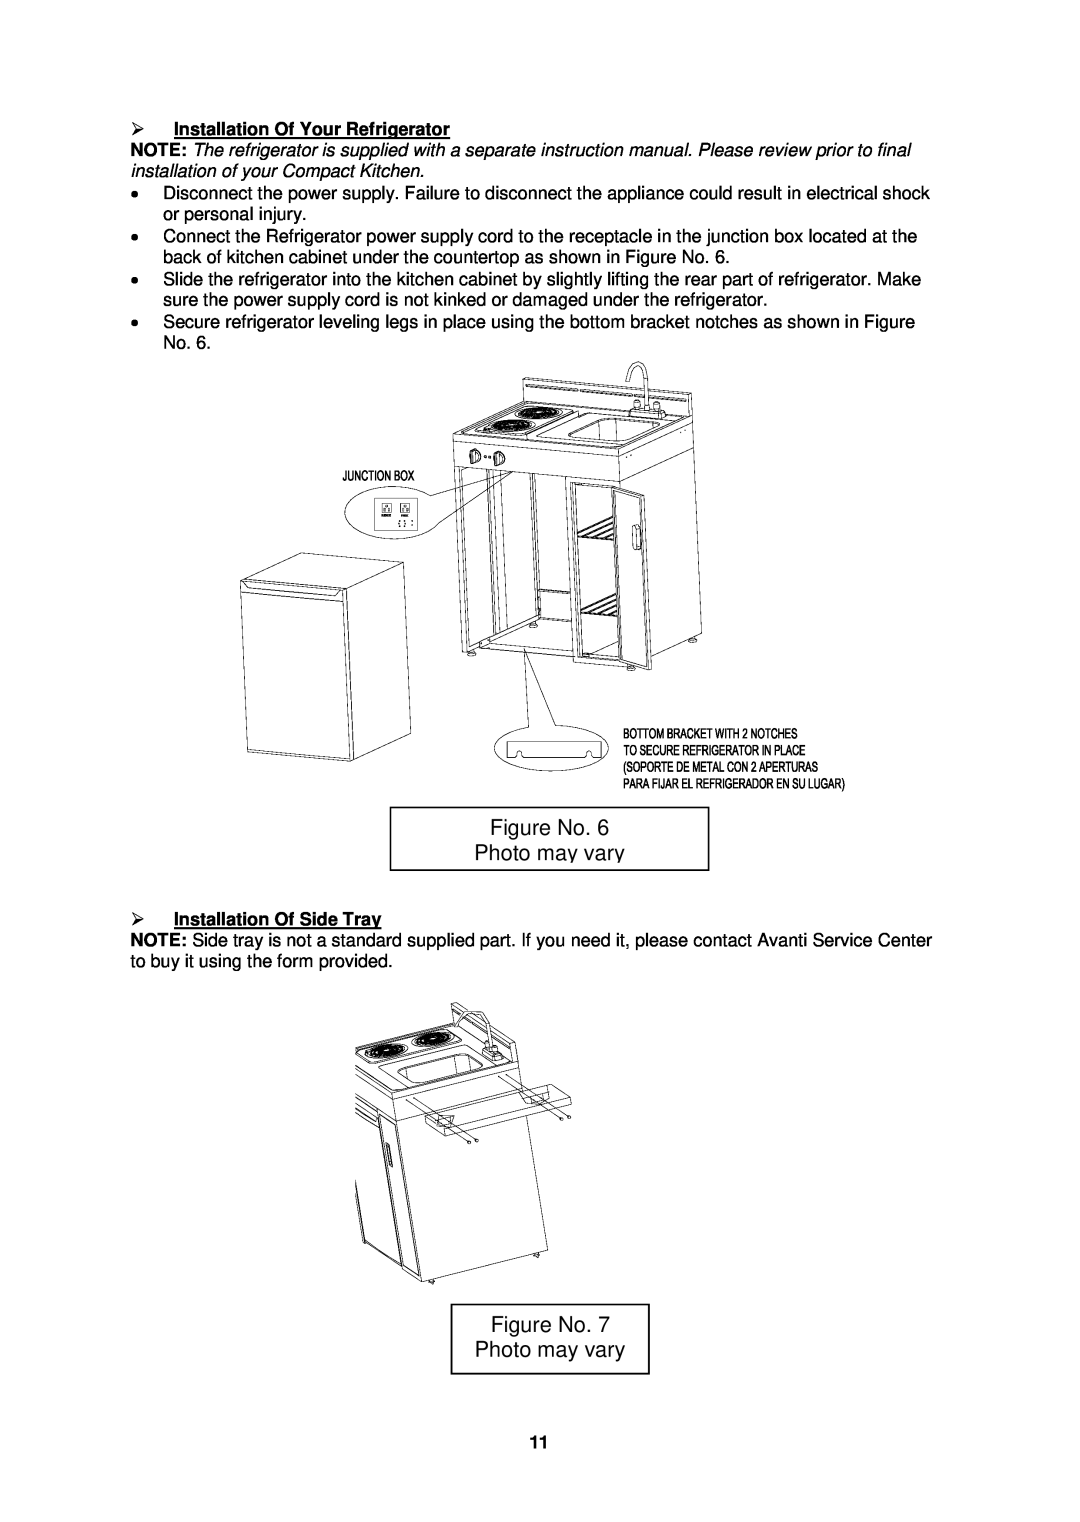 Avanti CK301SHP Figure No. Photo may vary, Installation Of Your Refrigerator, Installation Of Side Tray 